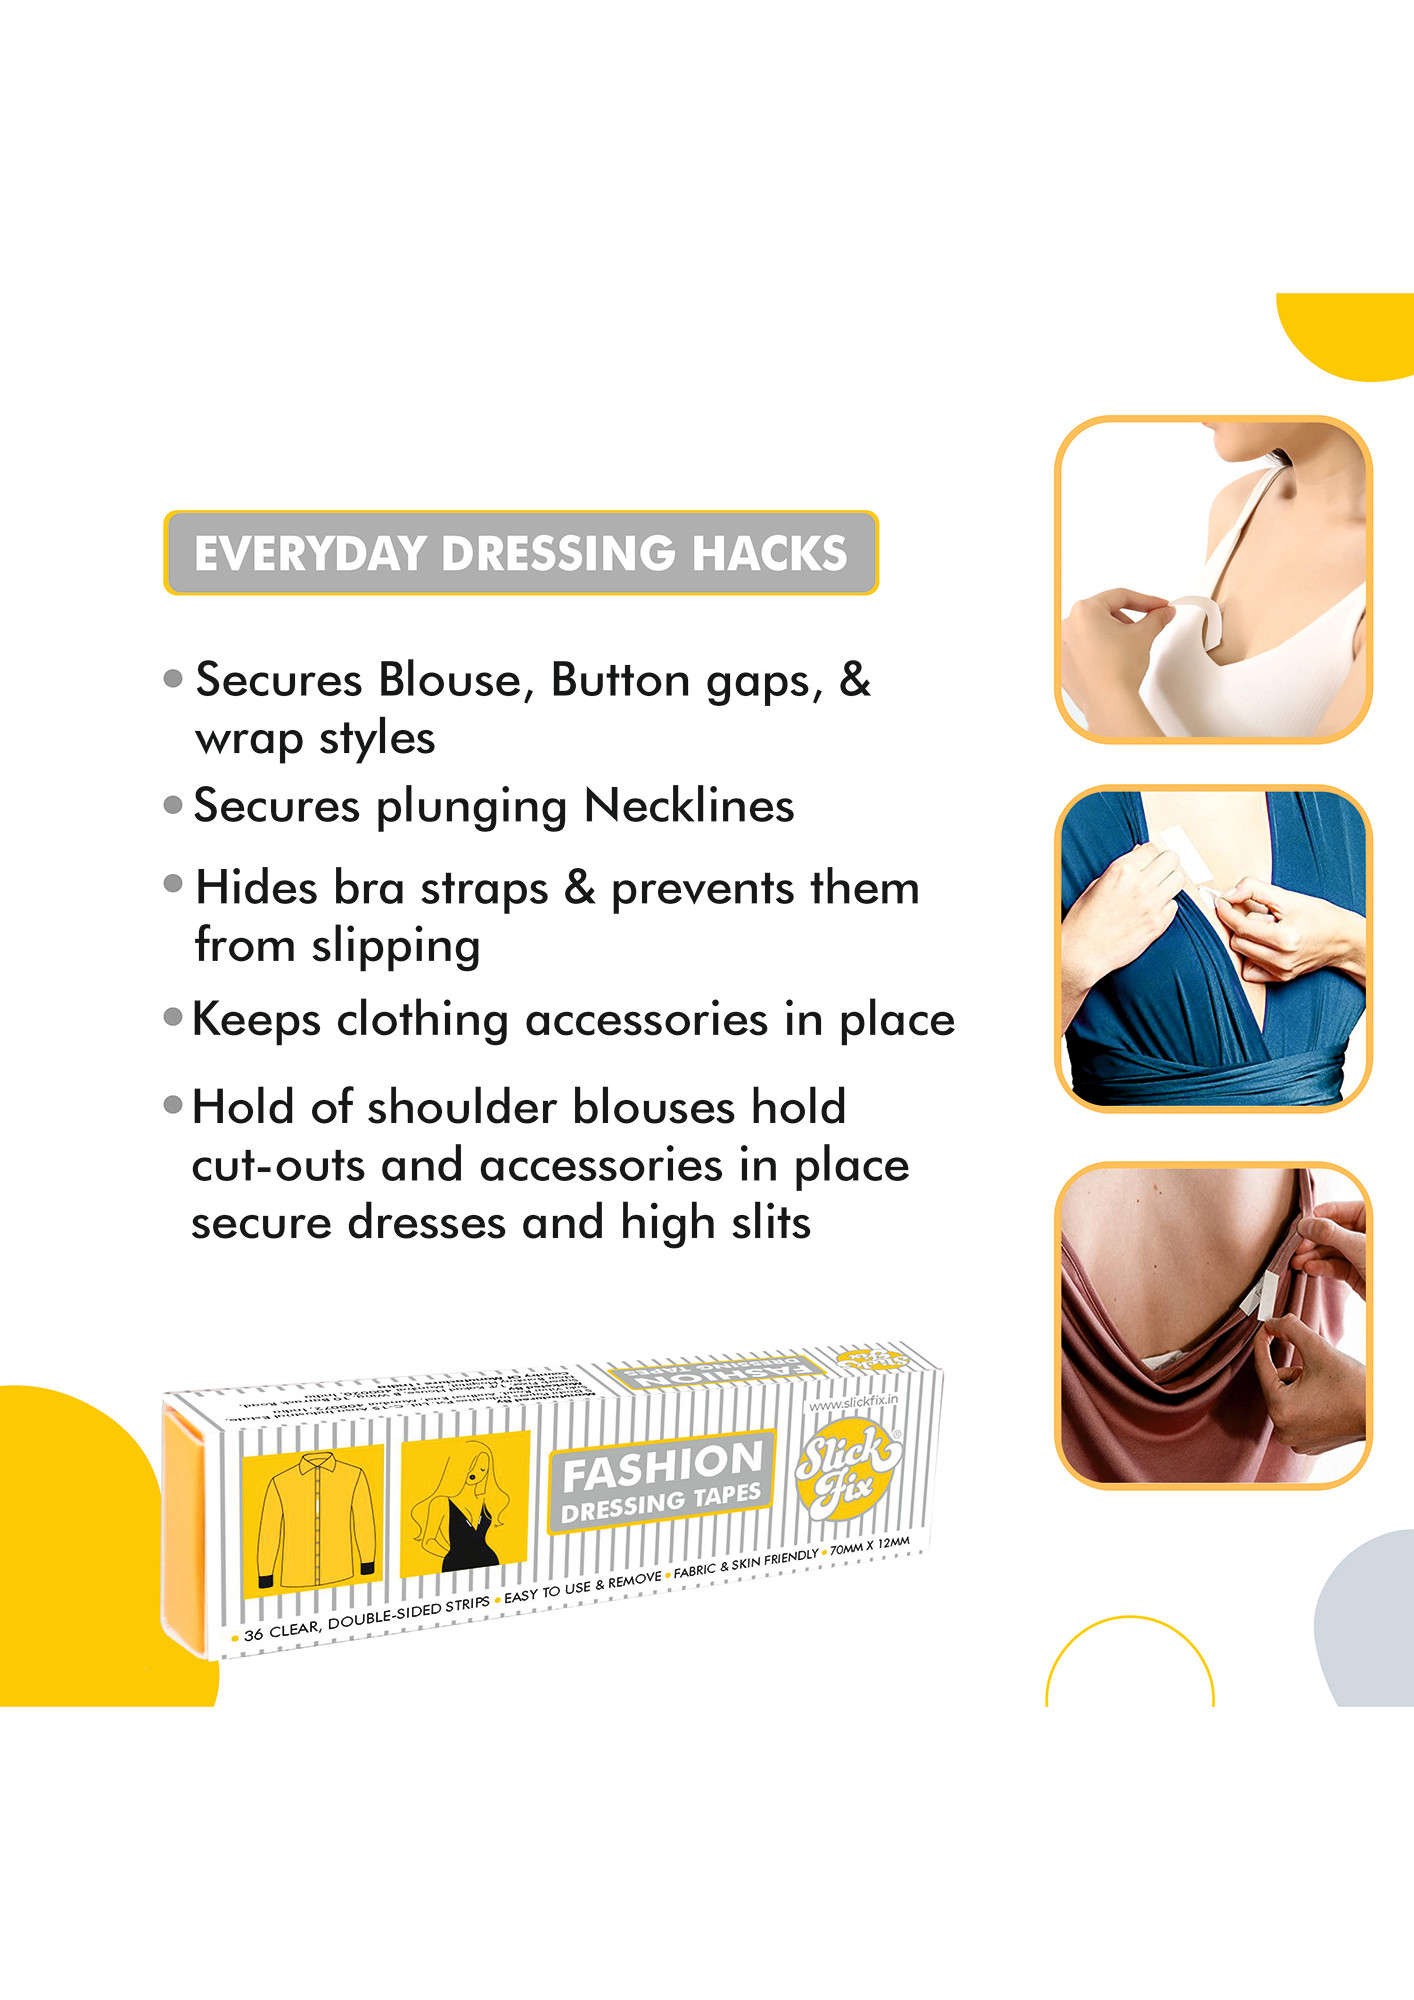 Body Tape,Clothes Tape, Adhesive And Gentle On Skin And Fabrics